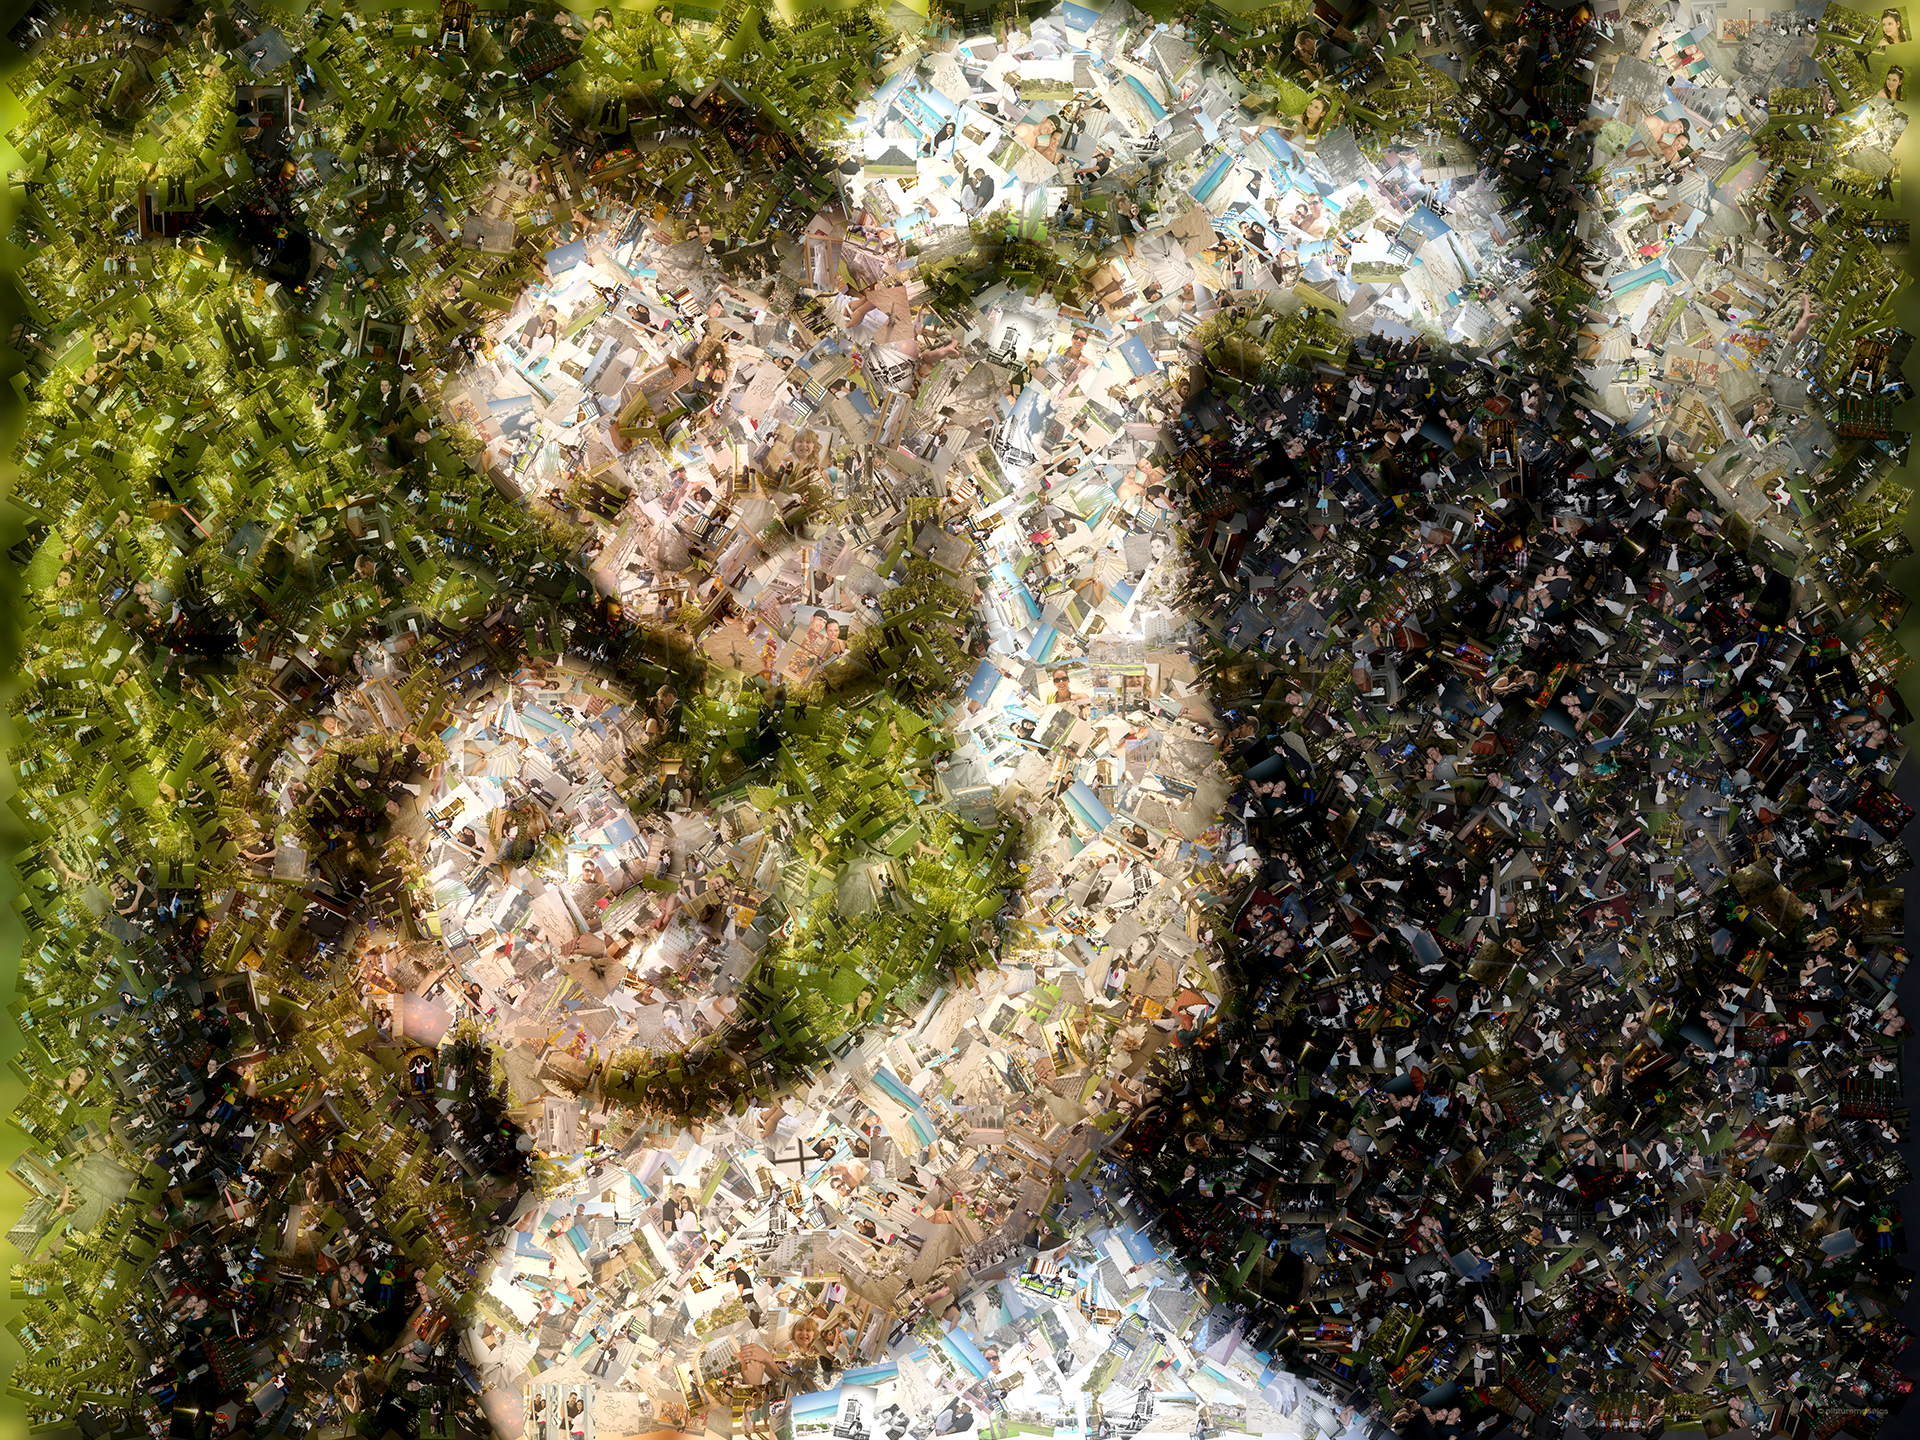 photo mosaic created using over 1,000 newly wed photos